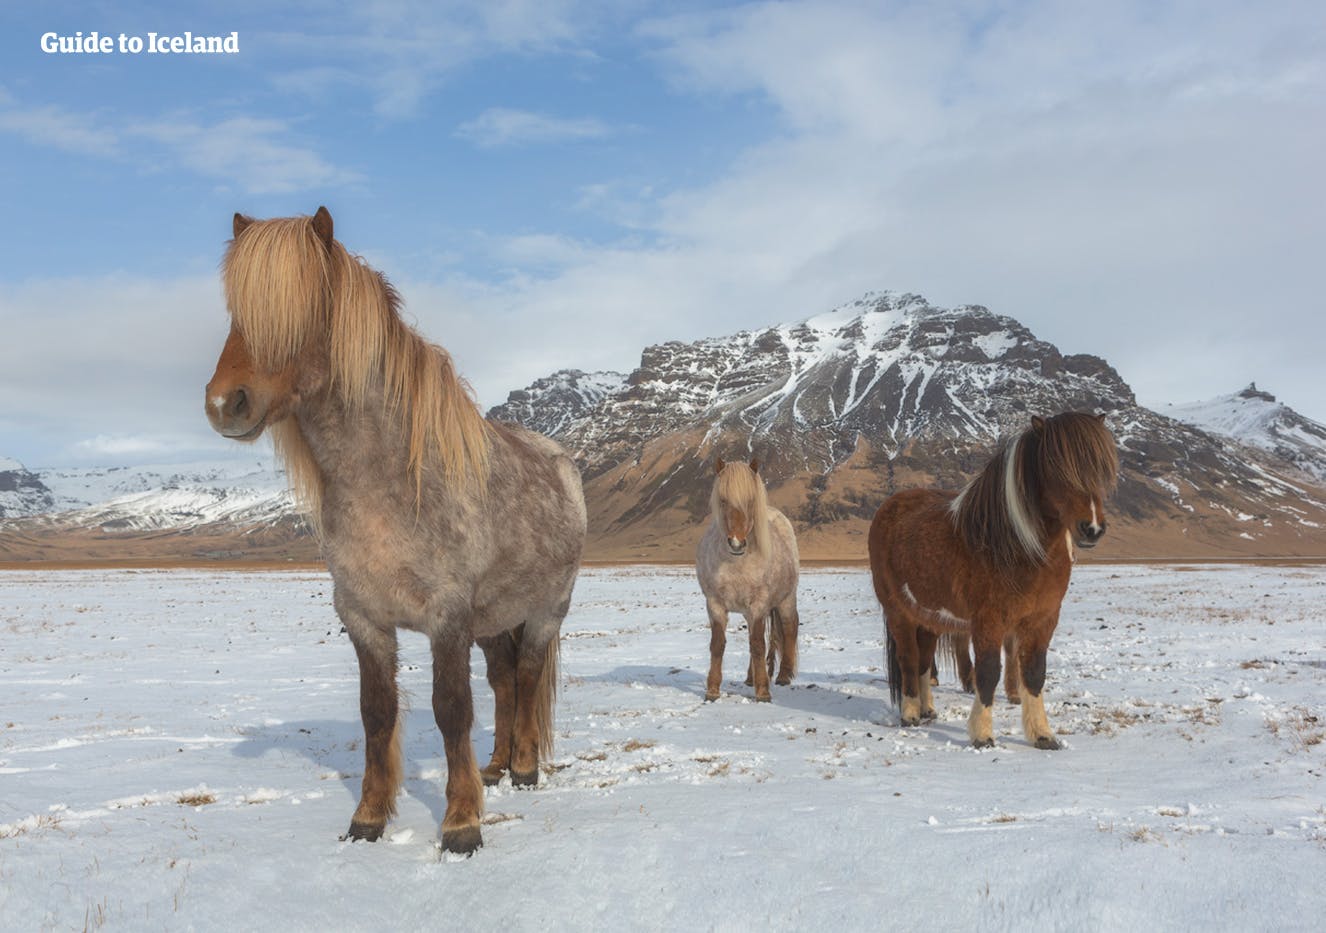 Icelandic horses are built to withstand the cold winds and deep snows of Iceland's winters.